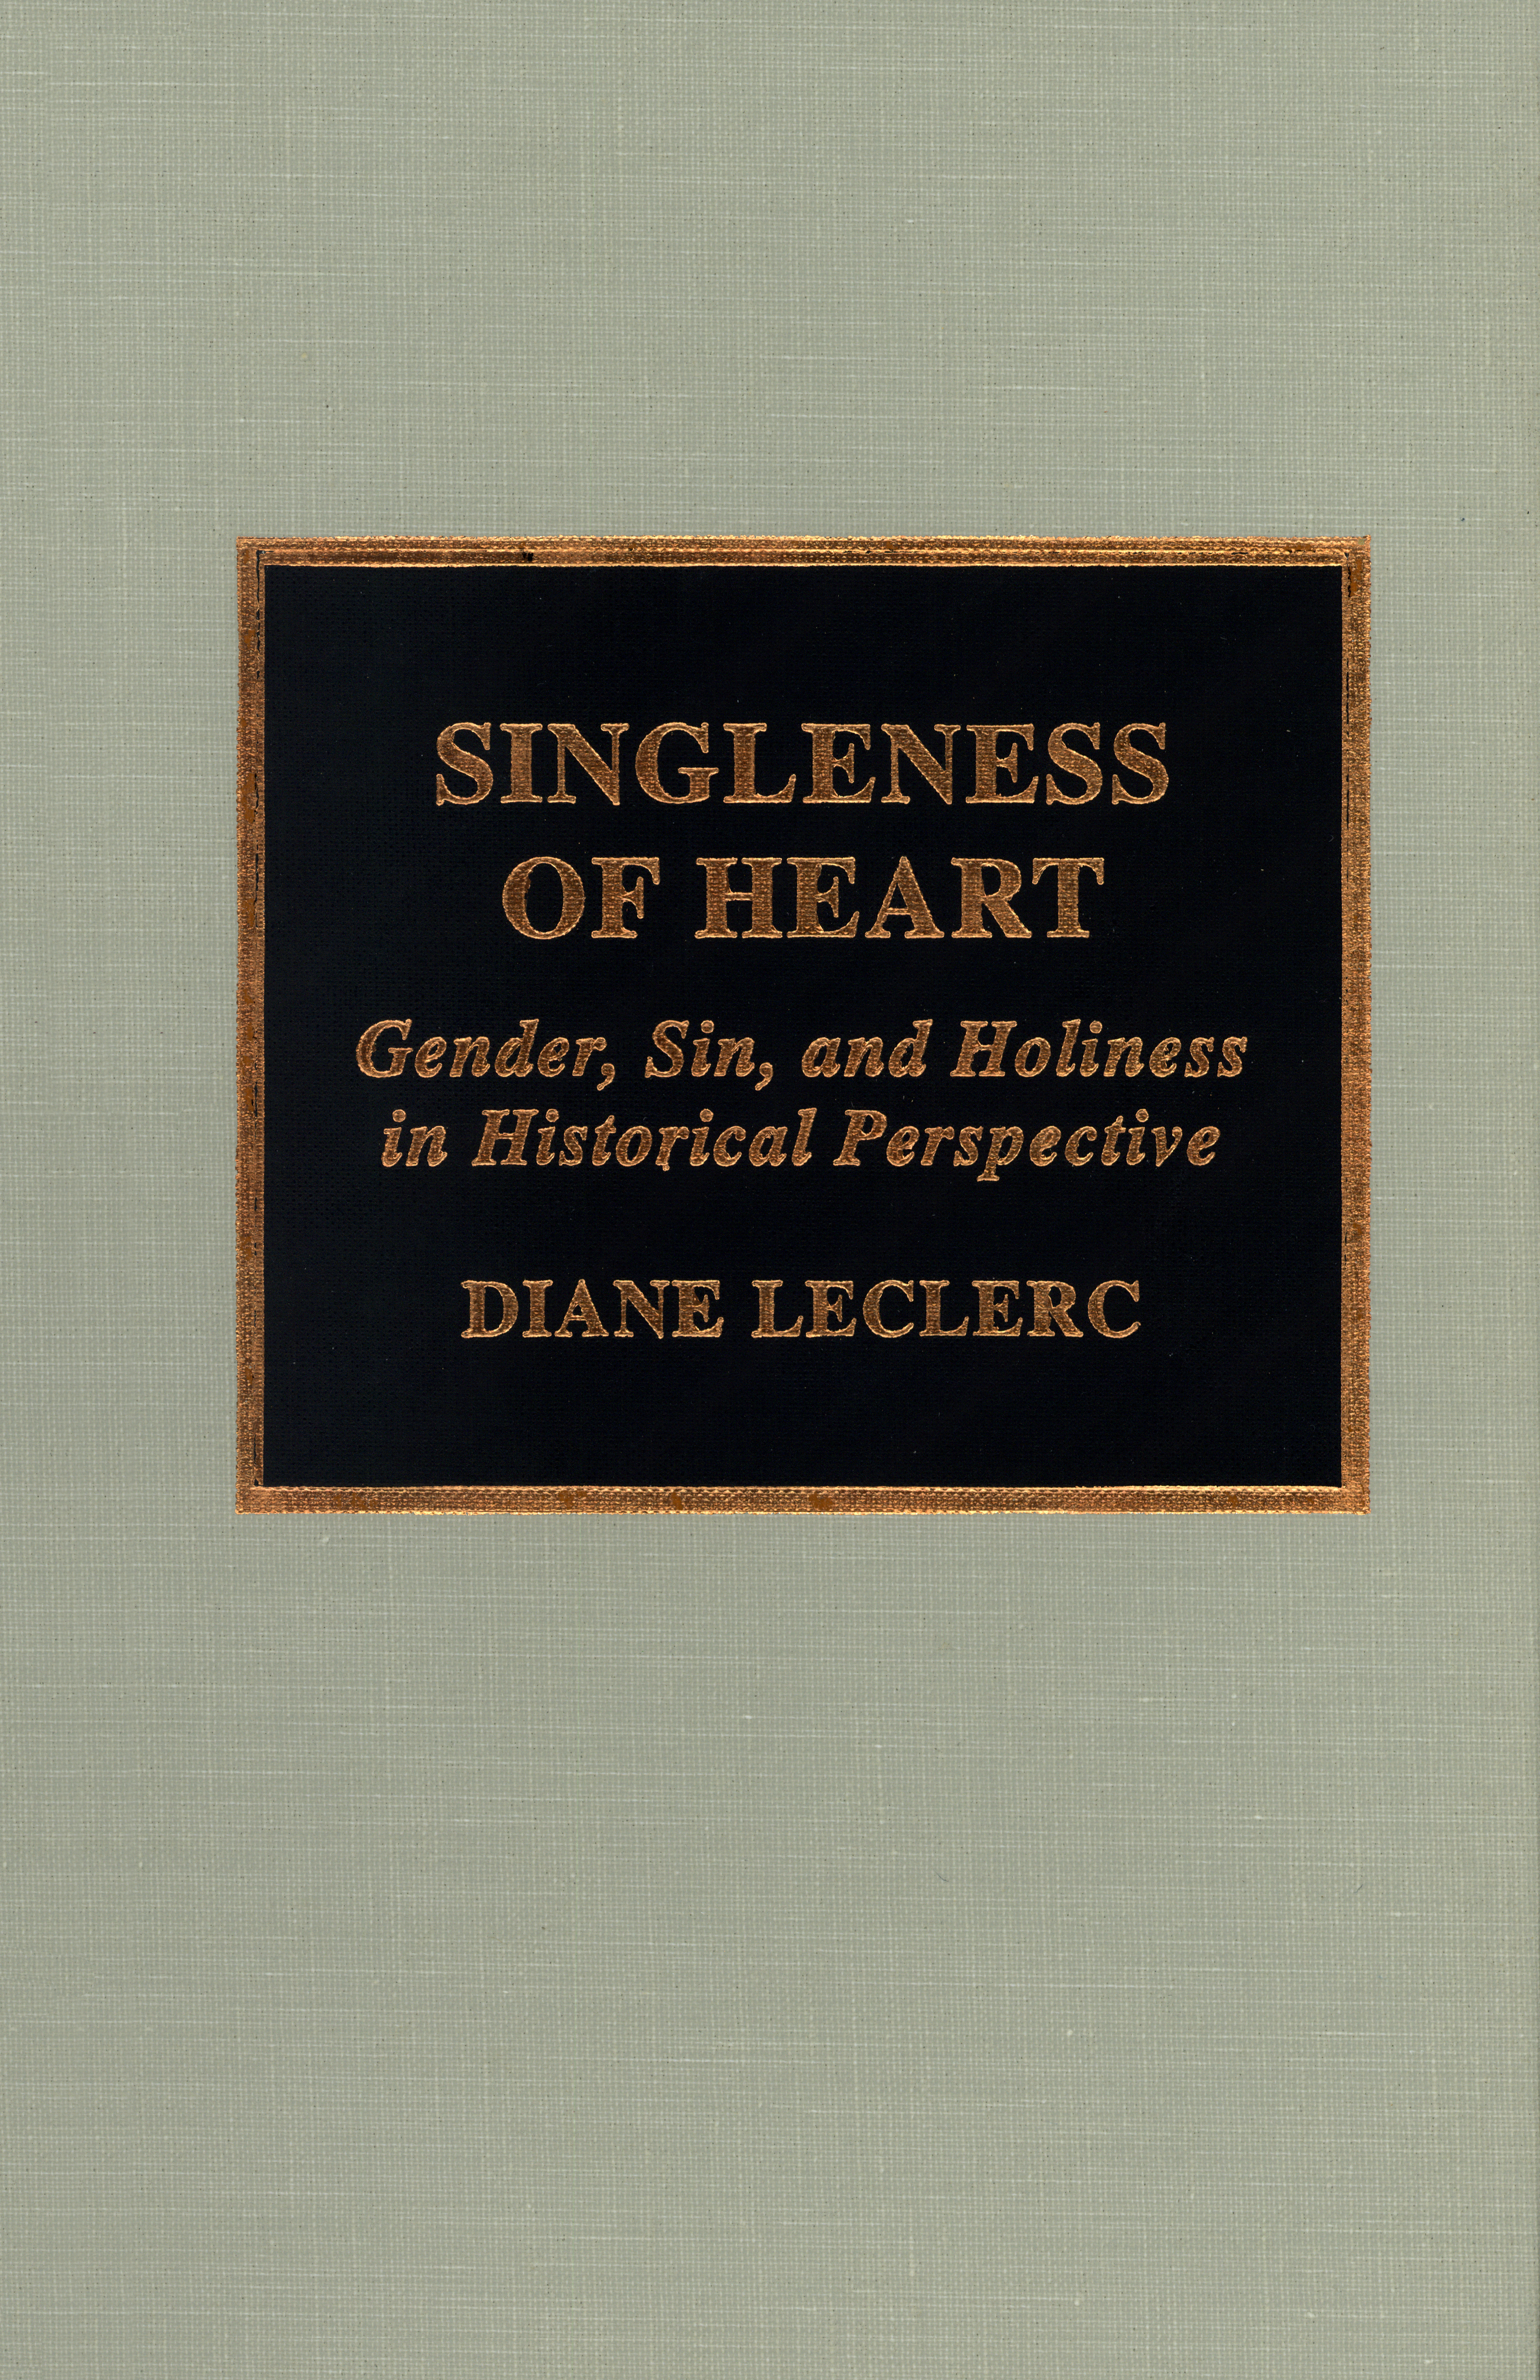 Singleness of Heart: Gender, Sin, and Holiness in Historical Perspective